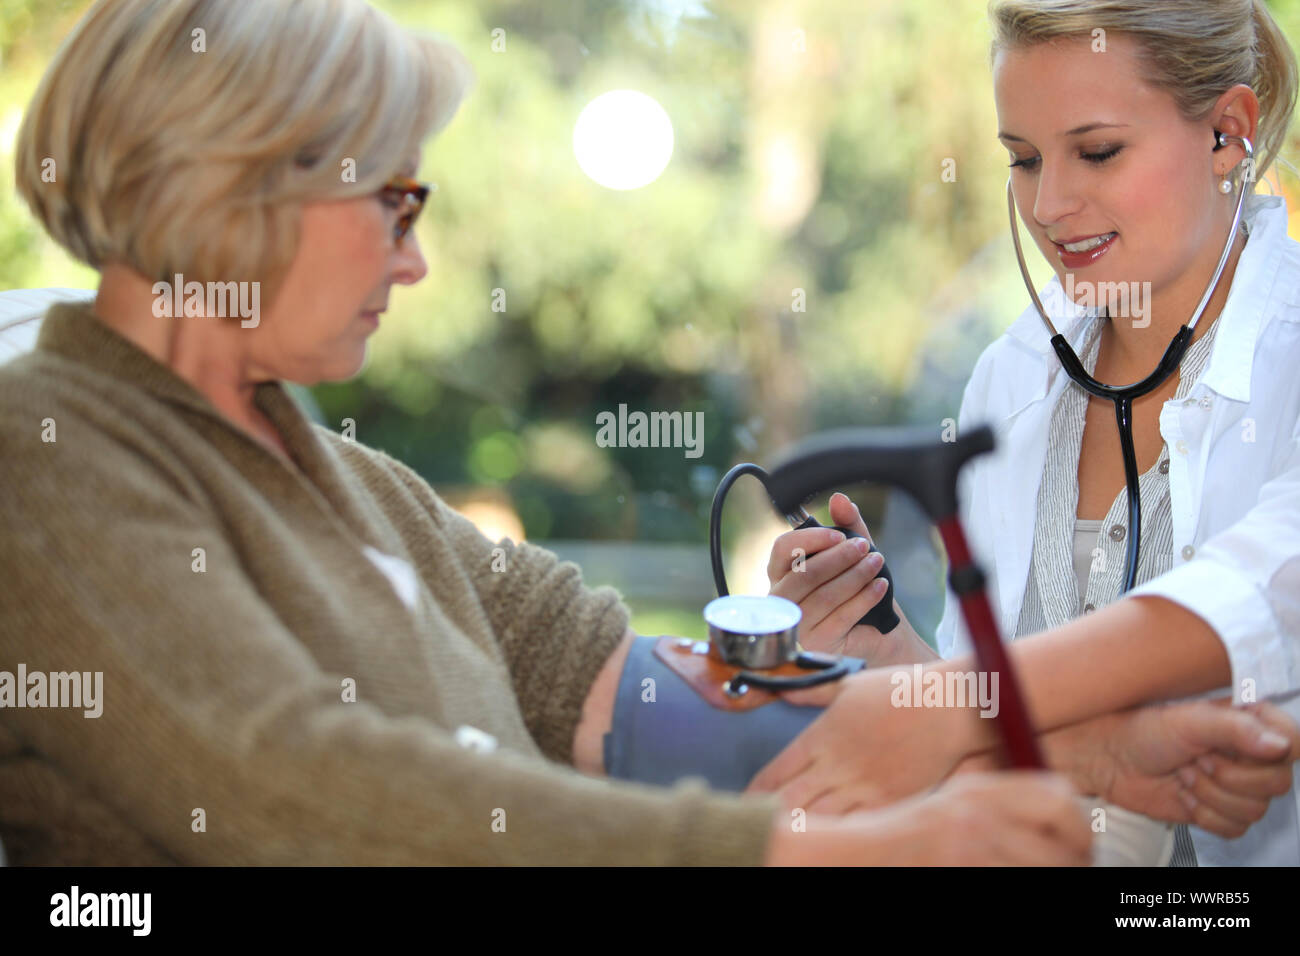 nurse is checking old woman's blood pressure Stock Photo